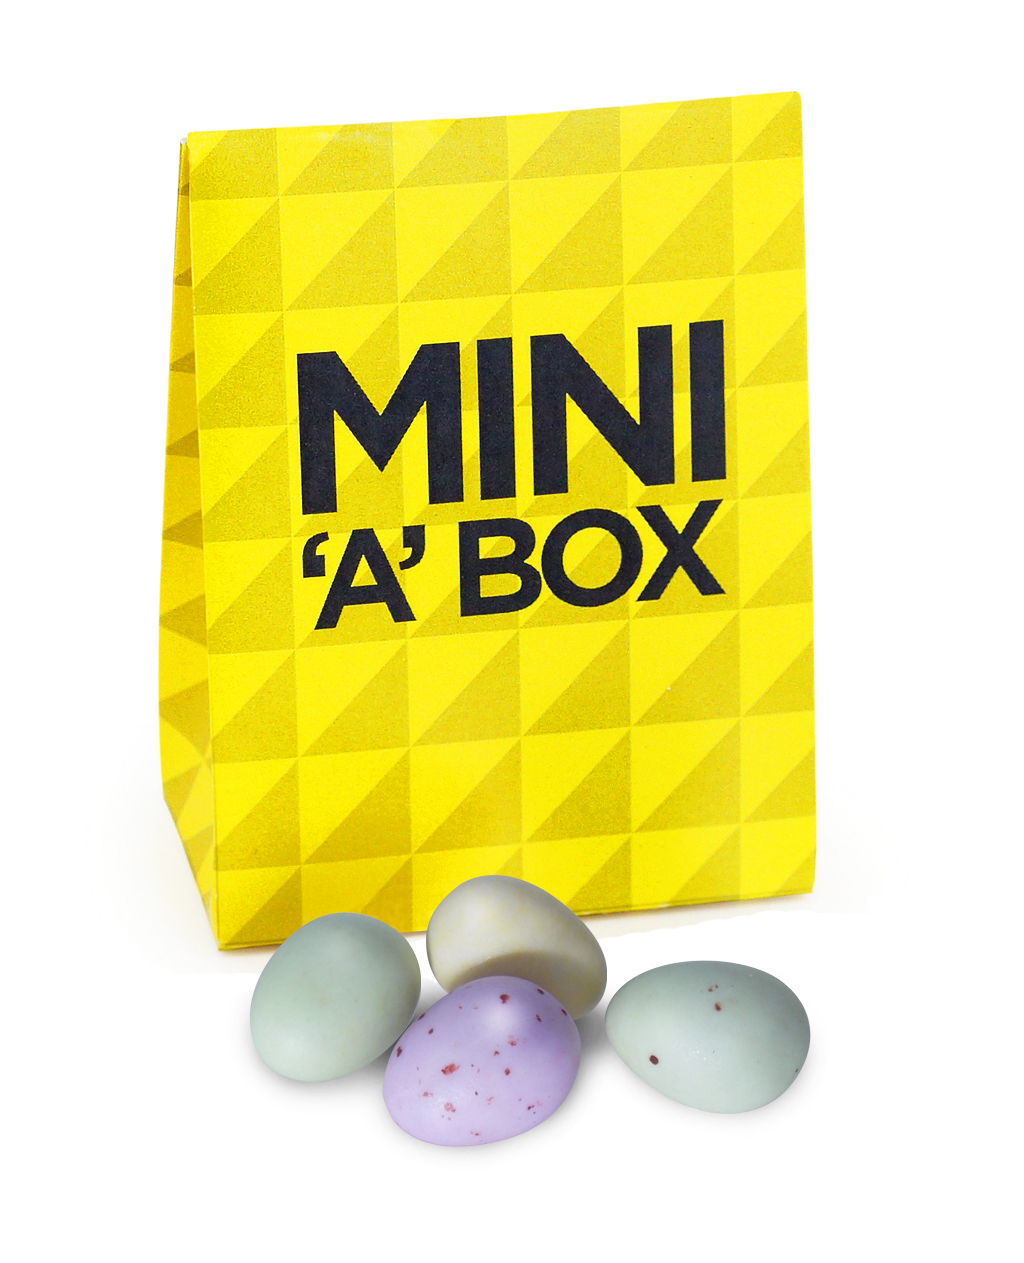 Promotional Mini 'a' Box Speckled Eggs